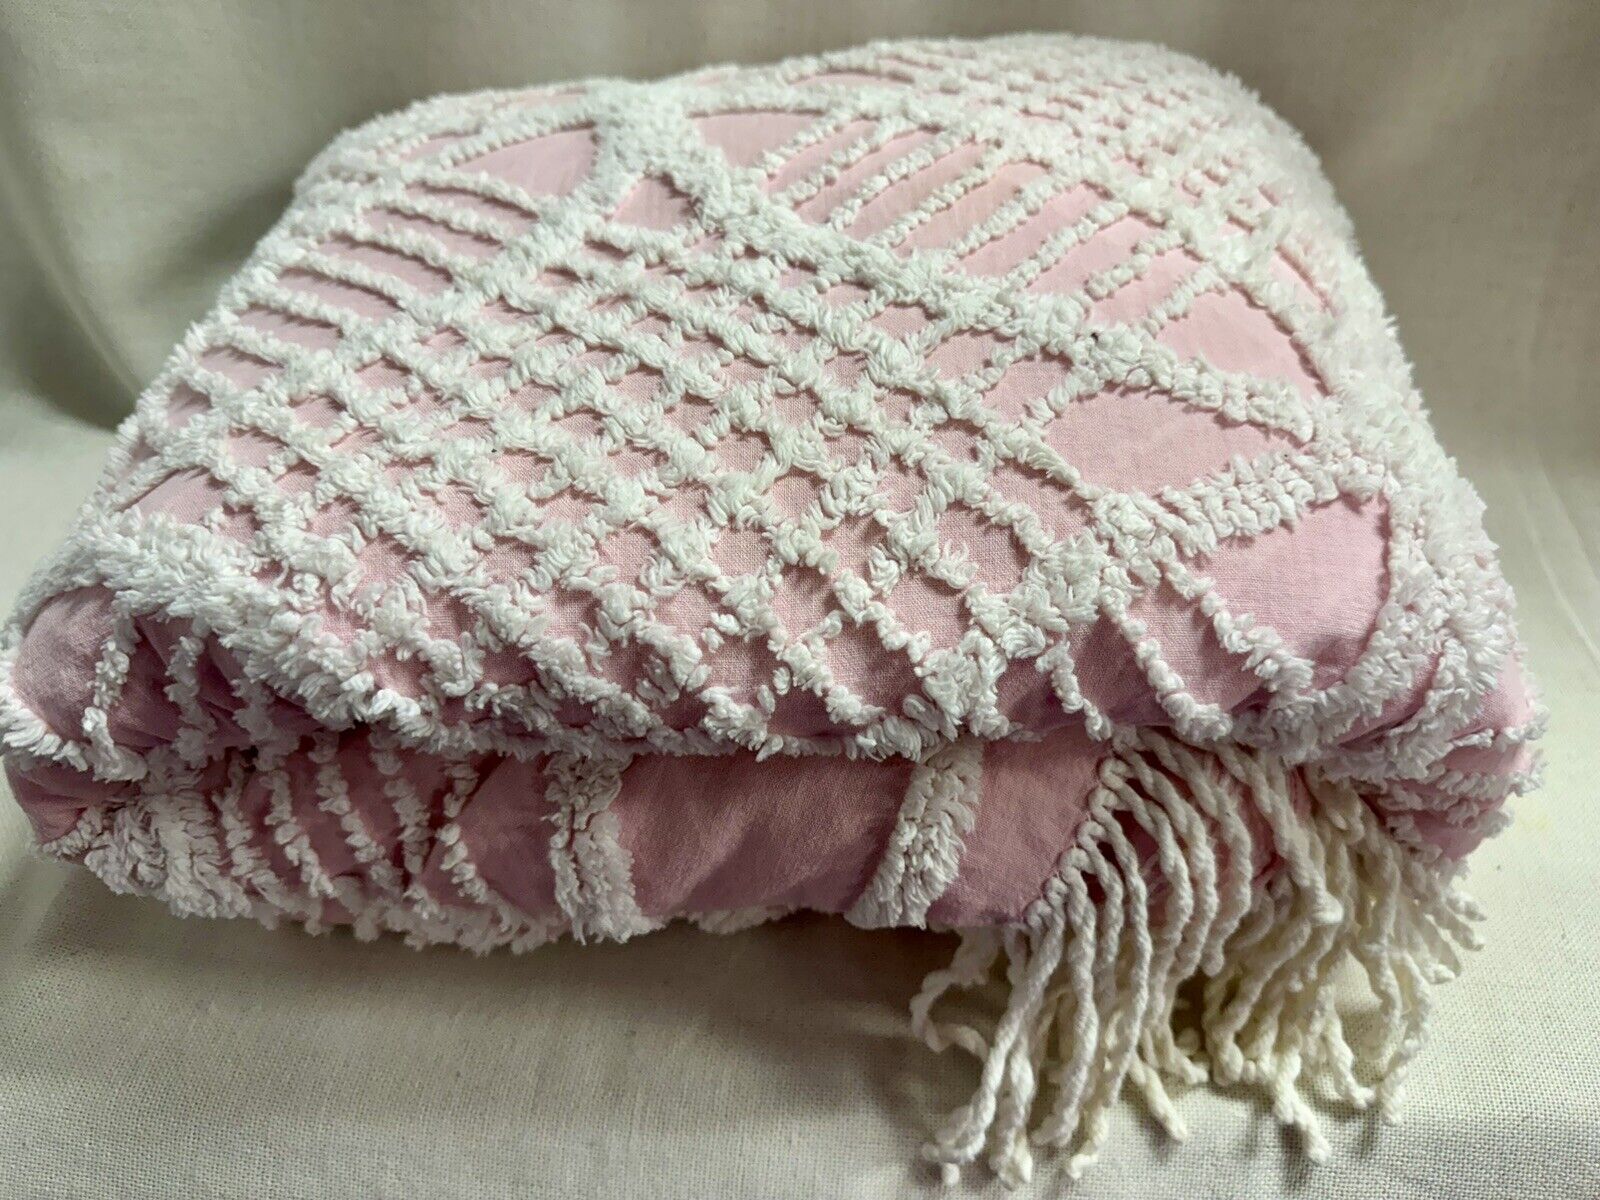 Vintage Estate Item, Pink And White Full/Double Bedspread With Fringe ￼